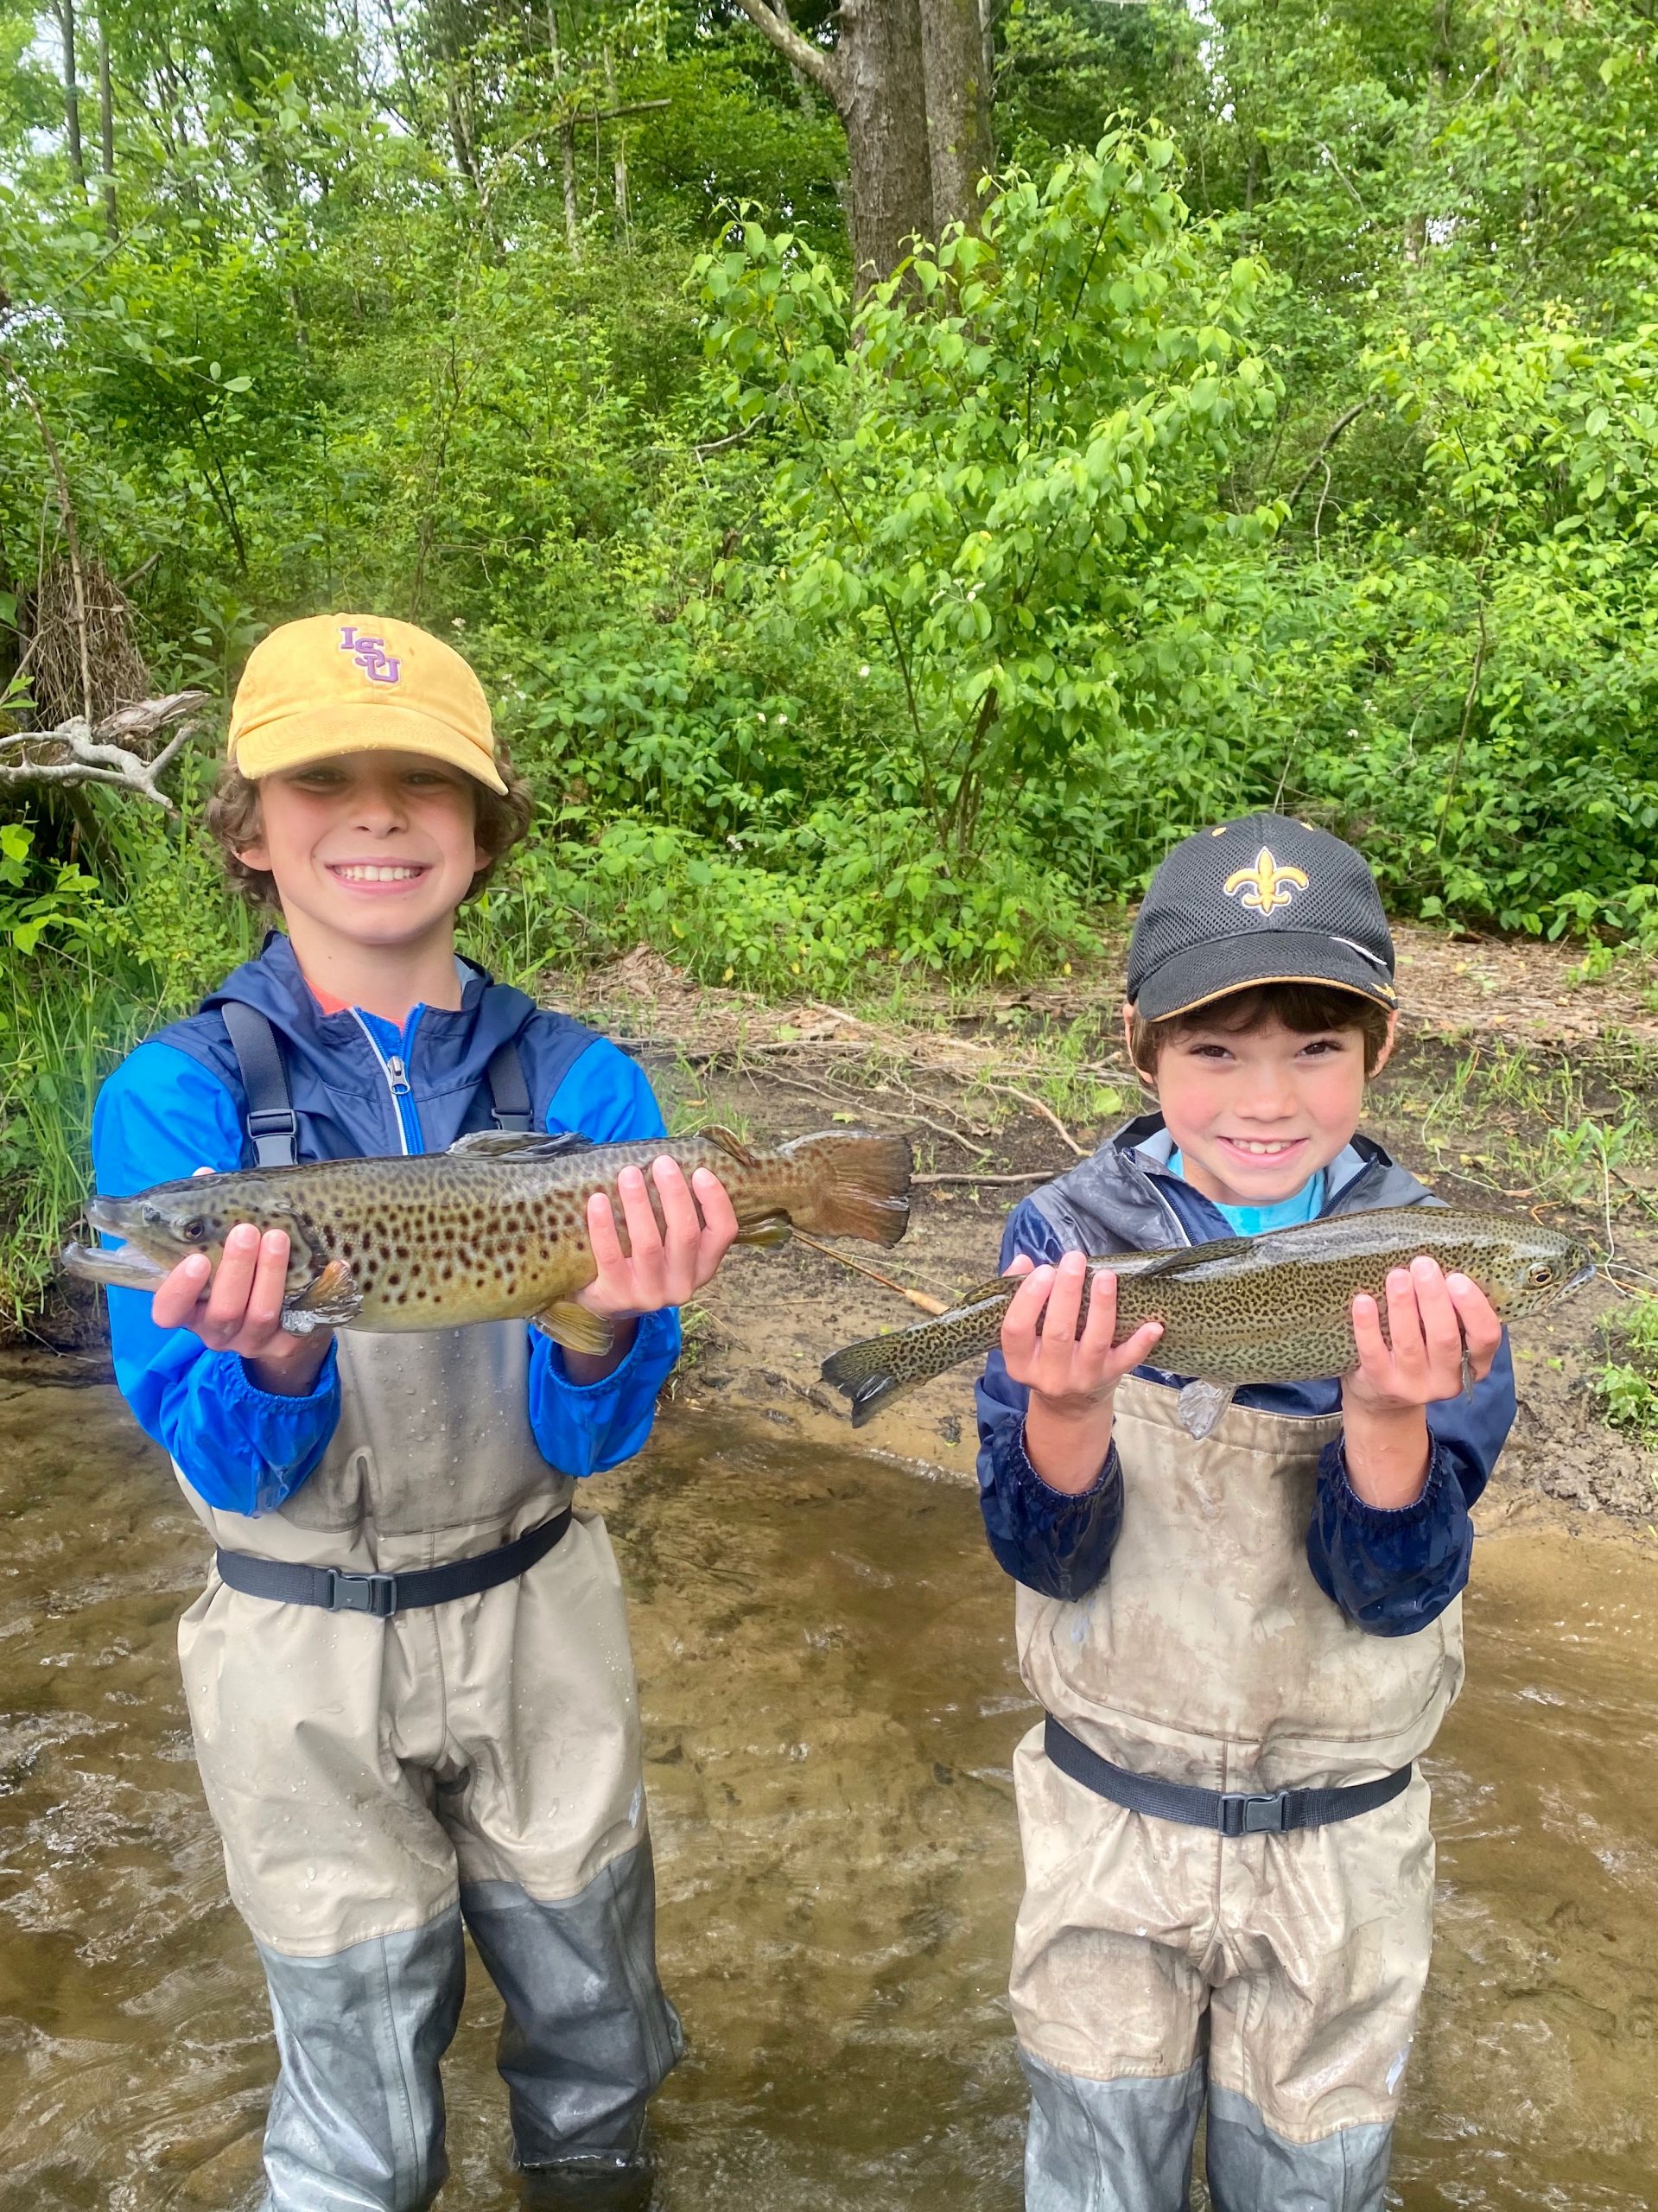 Bunny introduced her grandsons to fly fishing at Caesar’s Head. Her son Grayson’s boys, James and John-Henry, love to fish in the Davidson River.